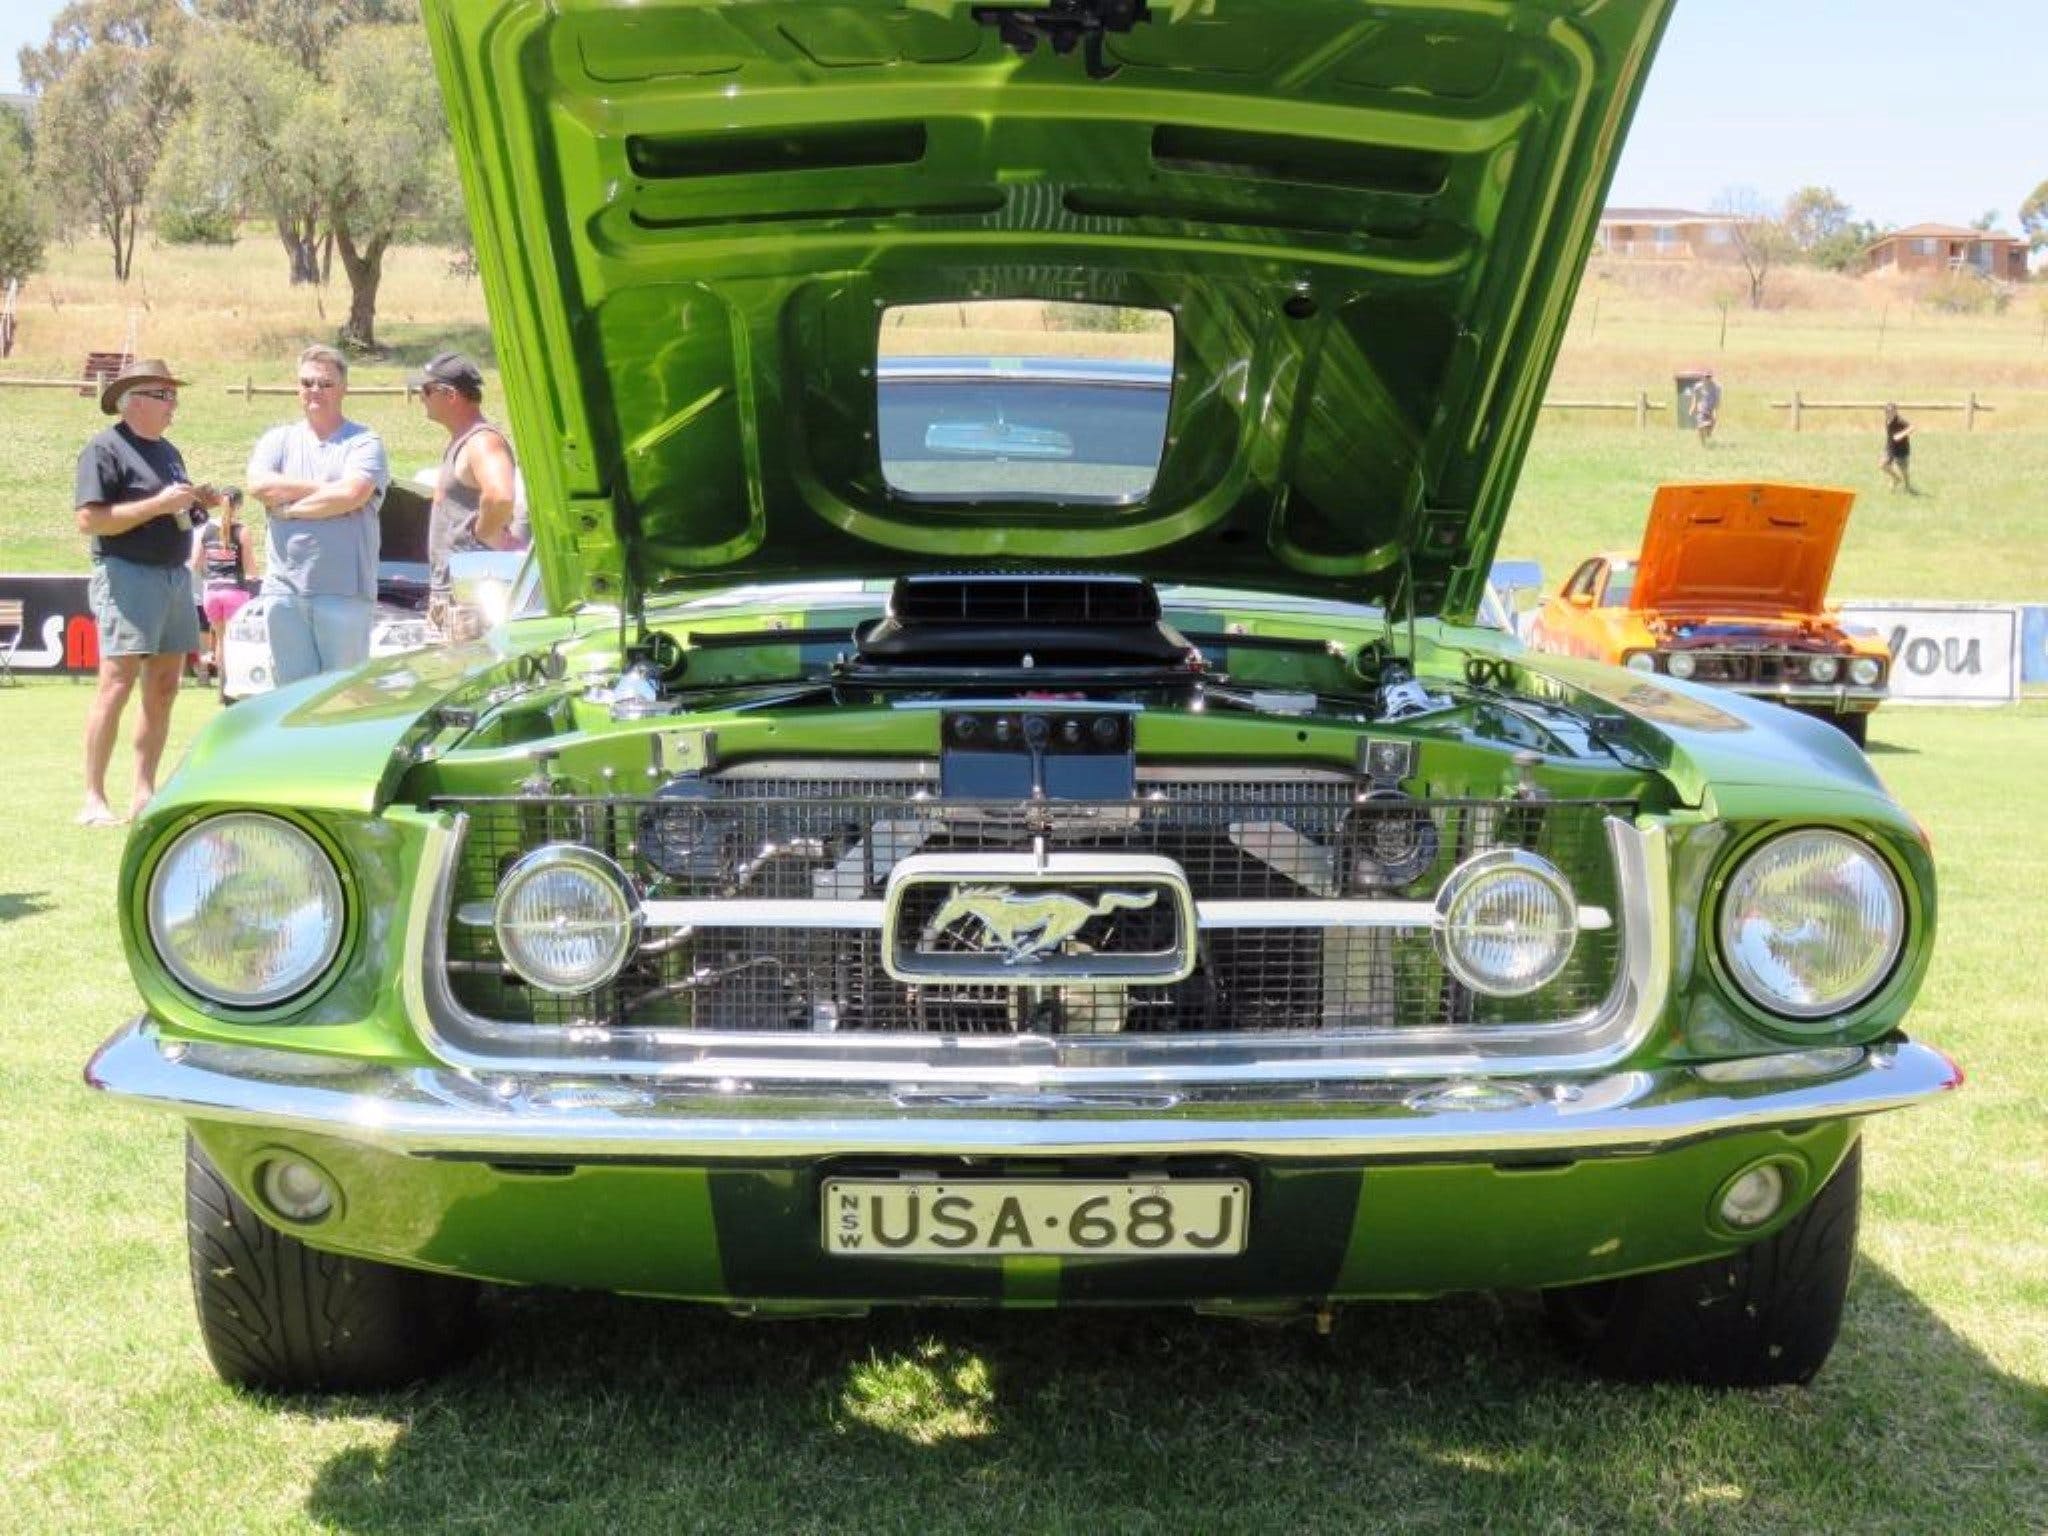 Central West Car Club Charity Show and Shine - Pubs Sydney